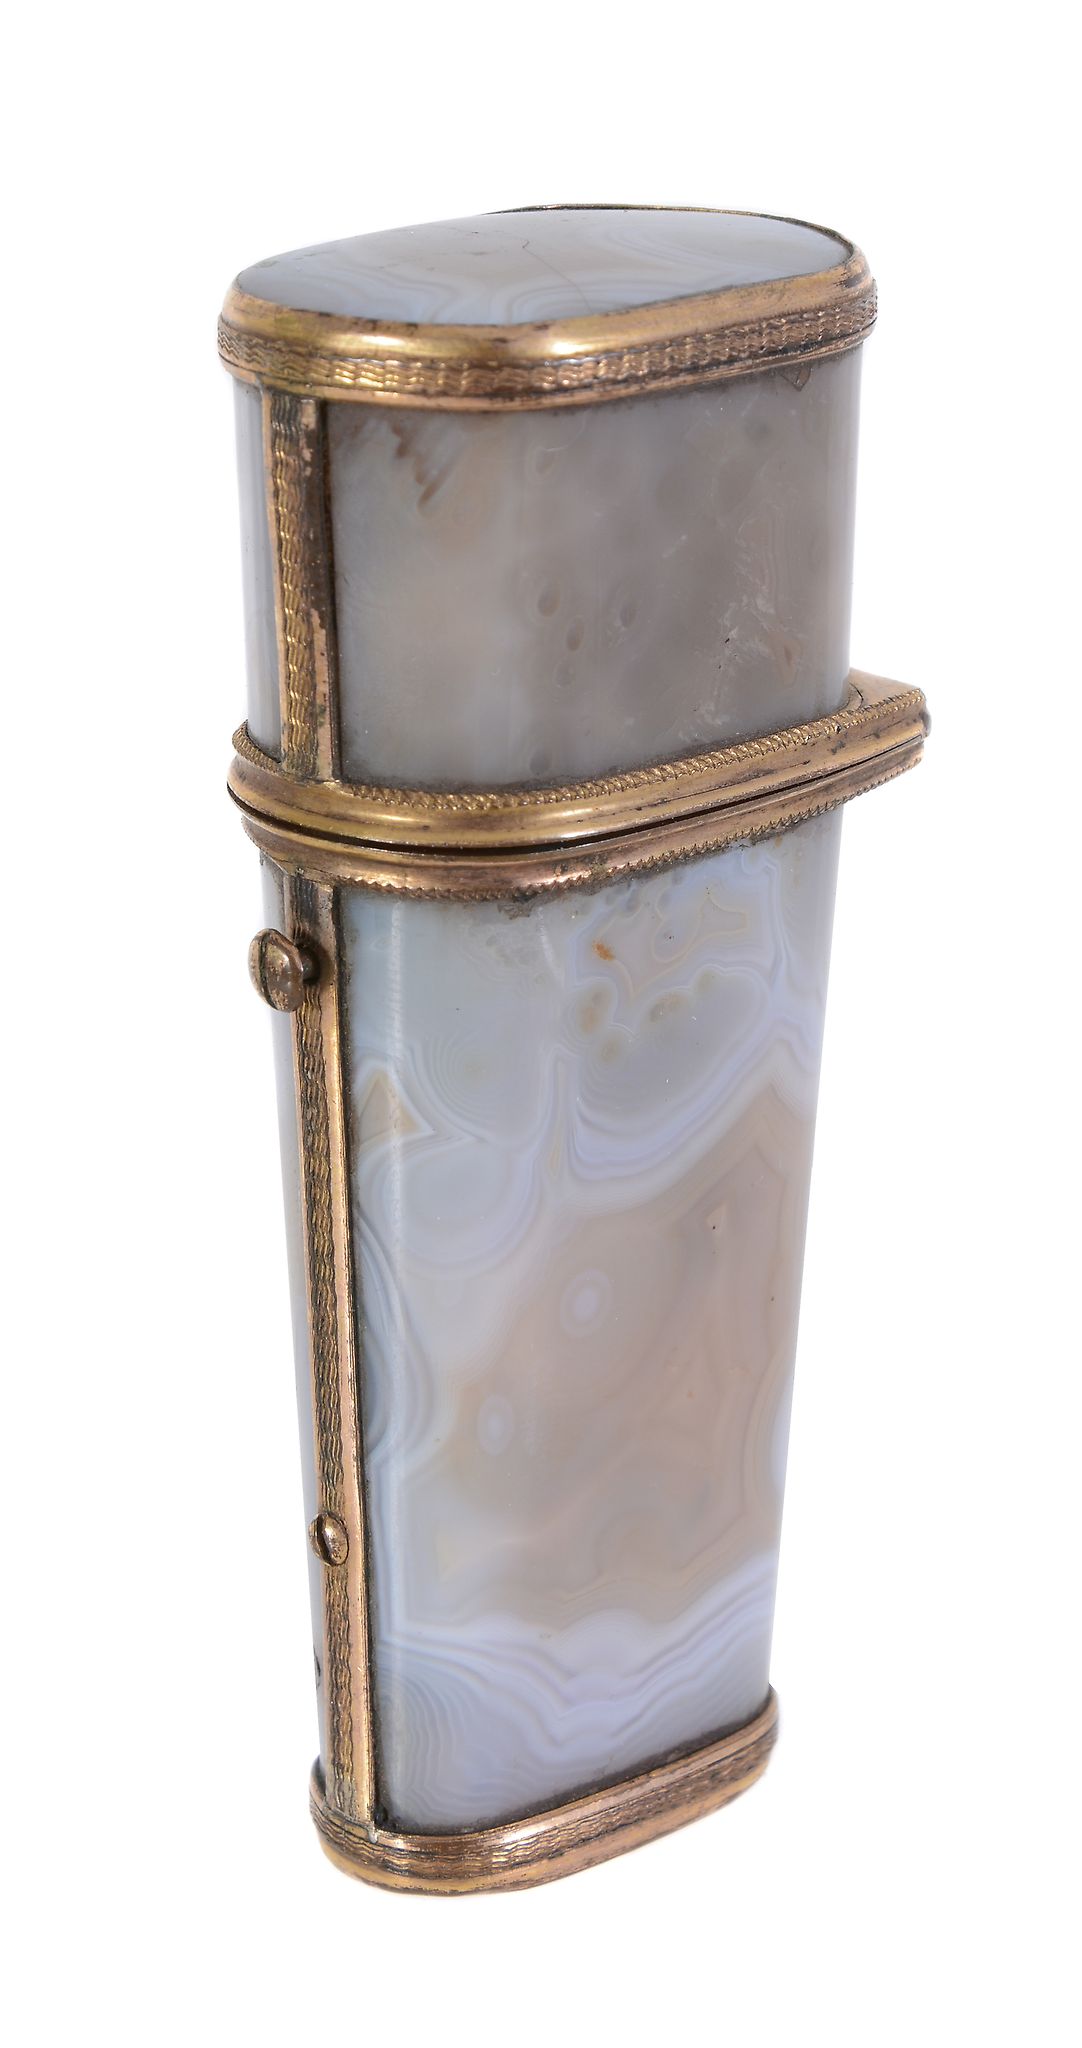 A late 18th century tapered oblong section agate necessaire, gilt metal mounted and containing a